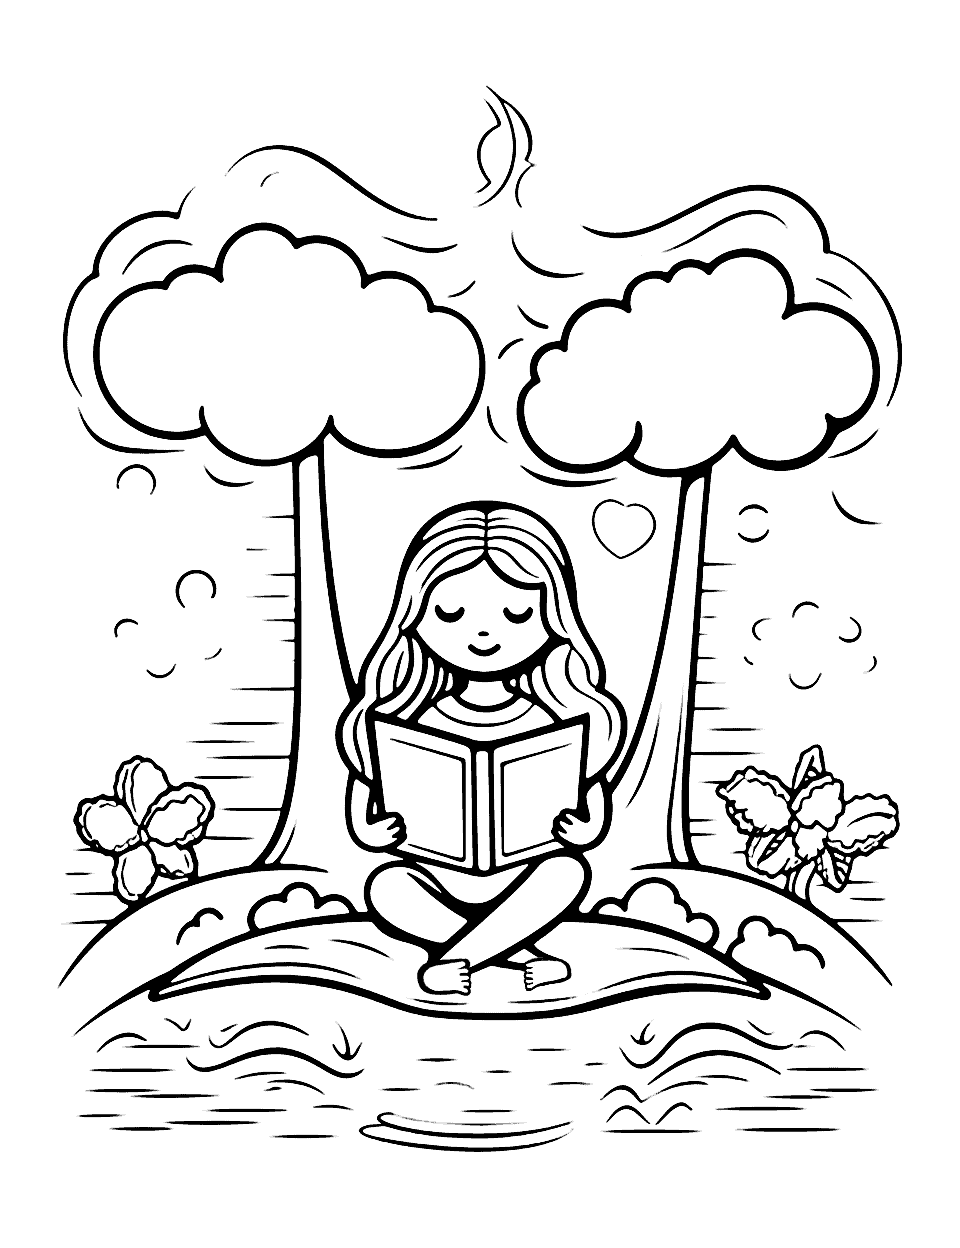 Summer Reading Coloring Page - A fourth grader reading under a tree, surrounded by nature and summer vibes.